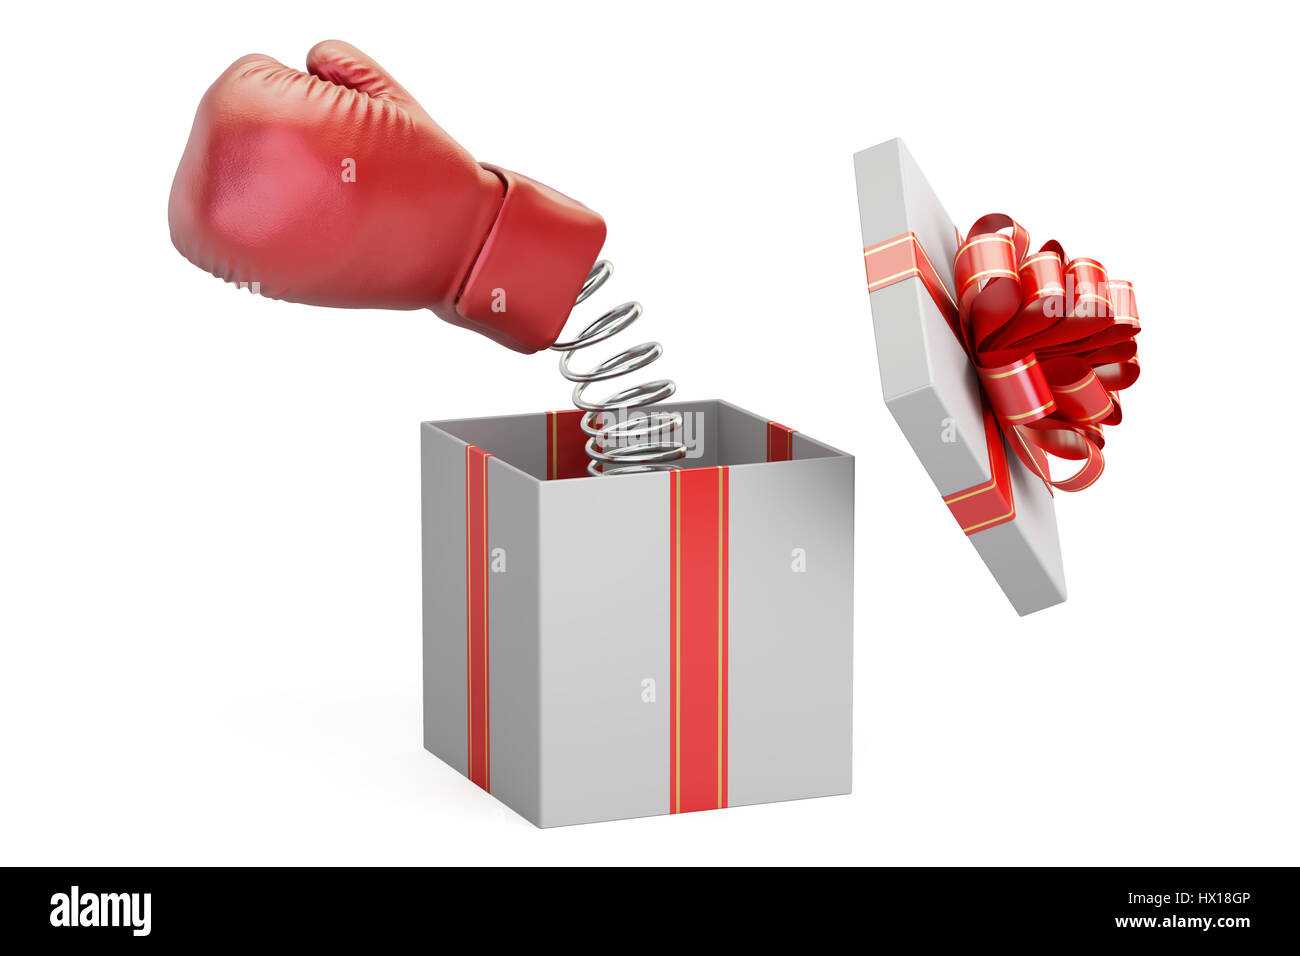 Boxing glove coming out from a gift box, 3D rendering Stock Photo